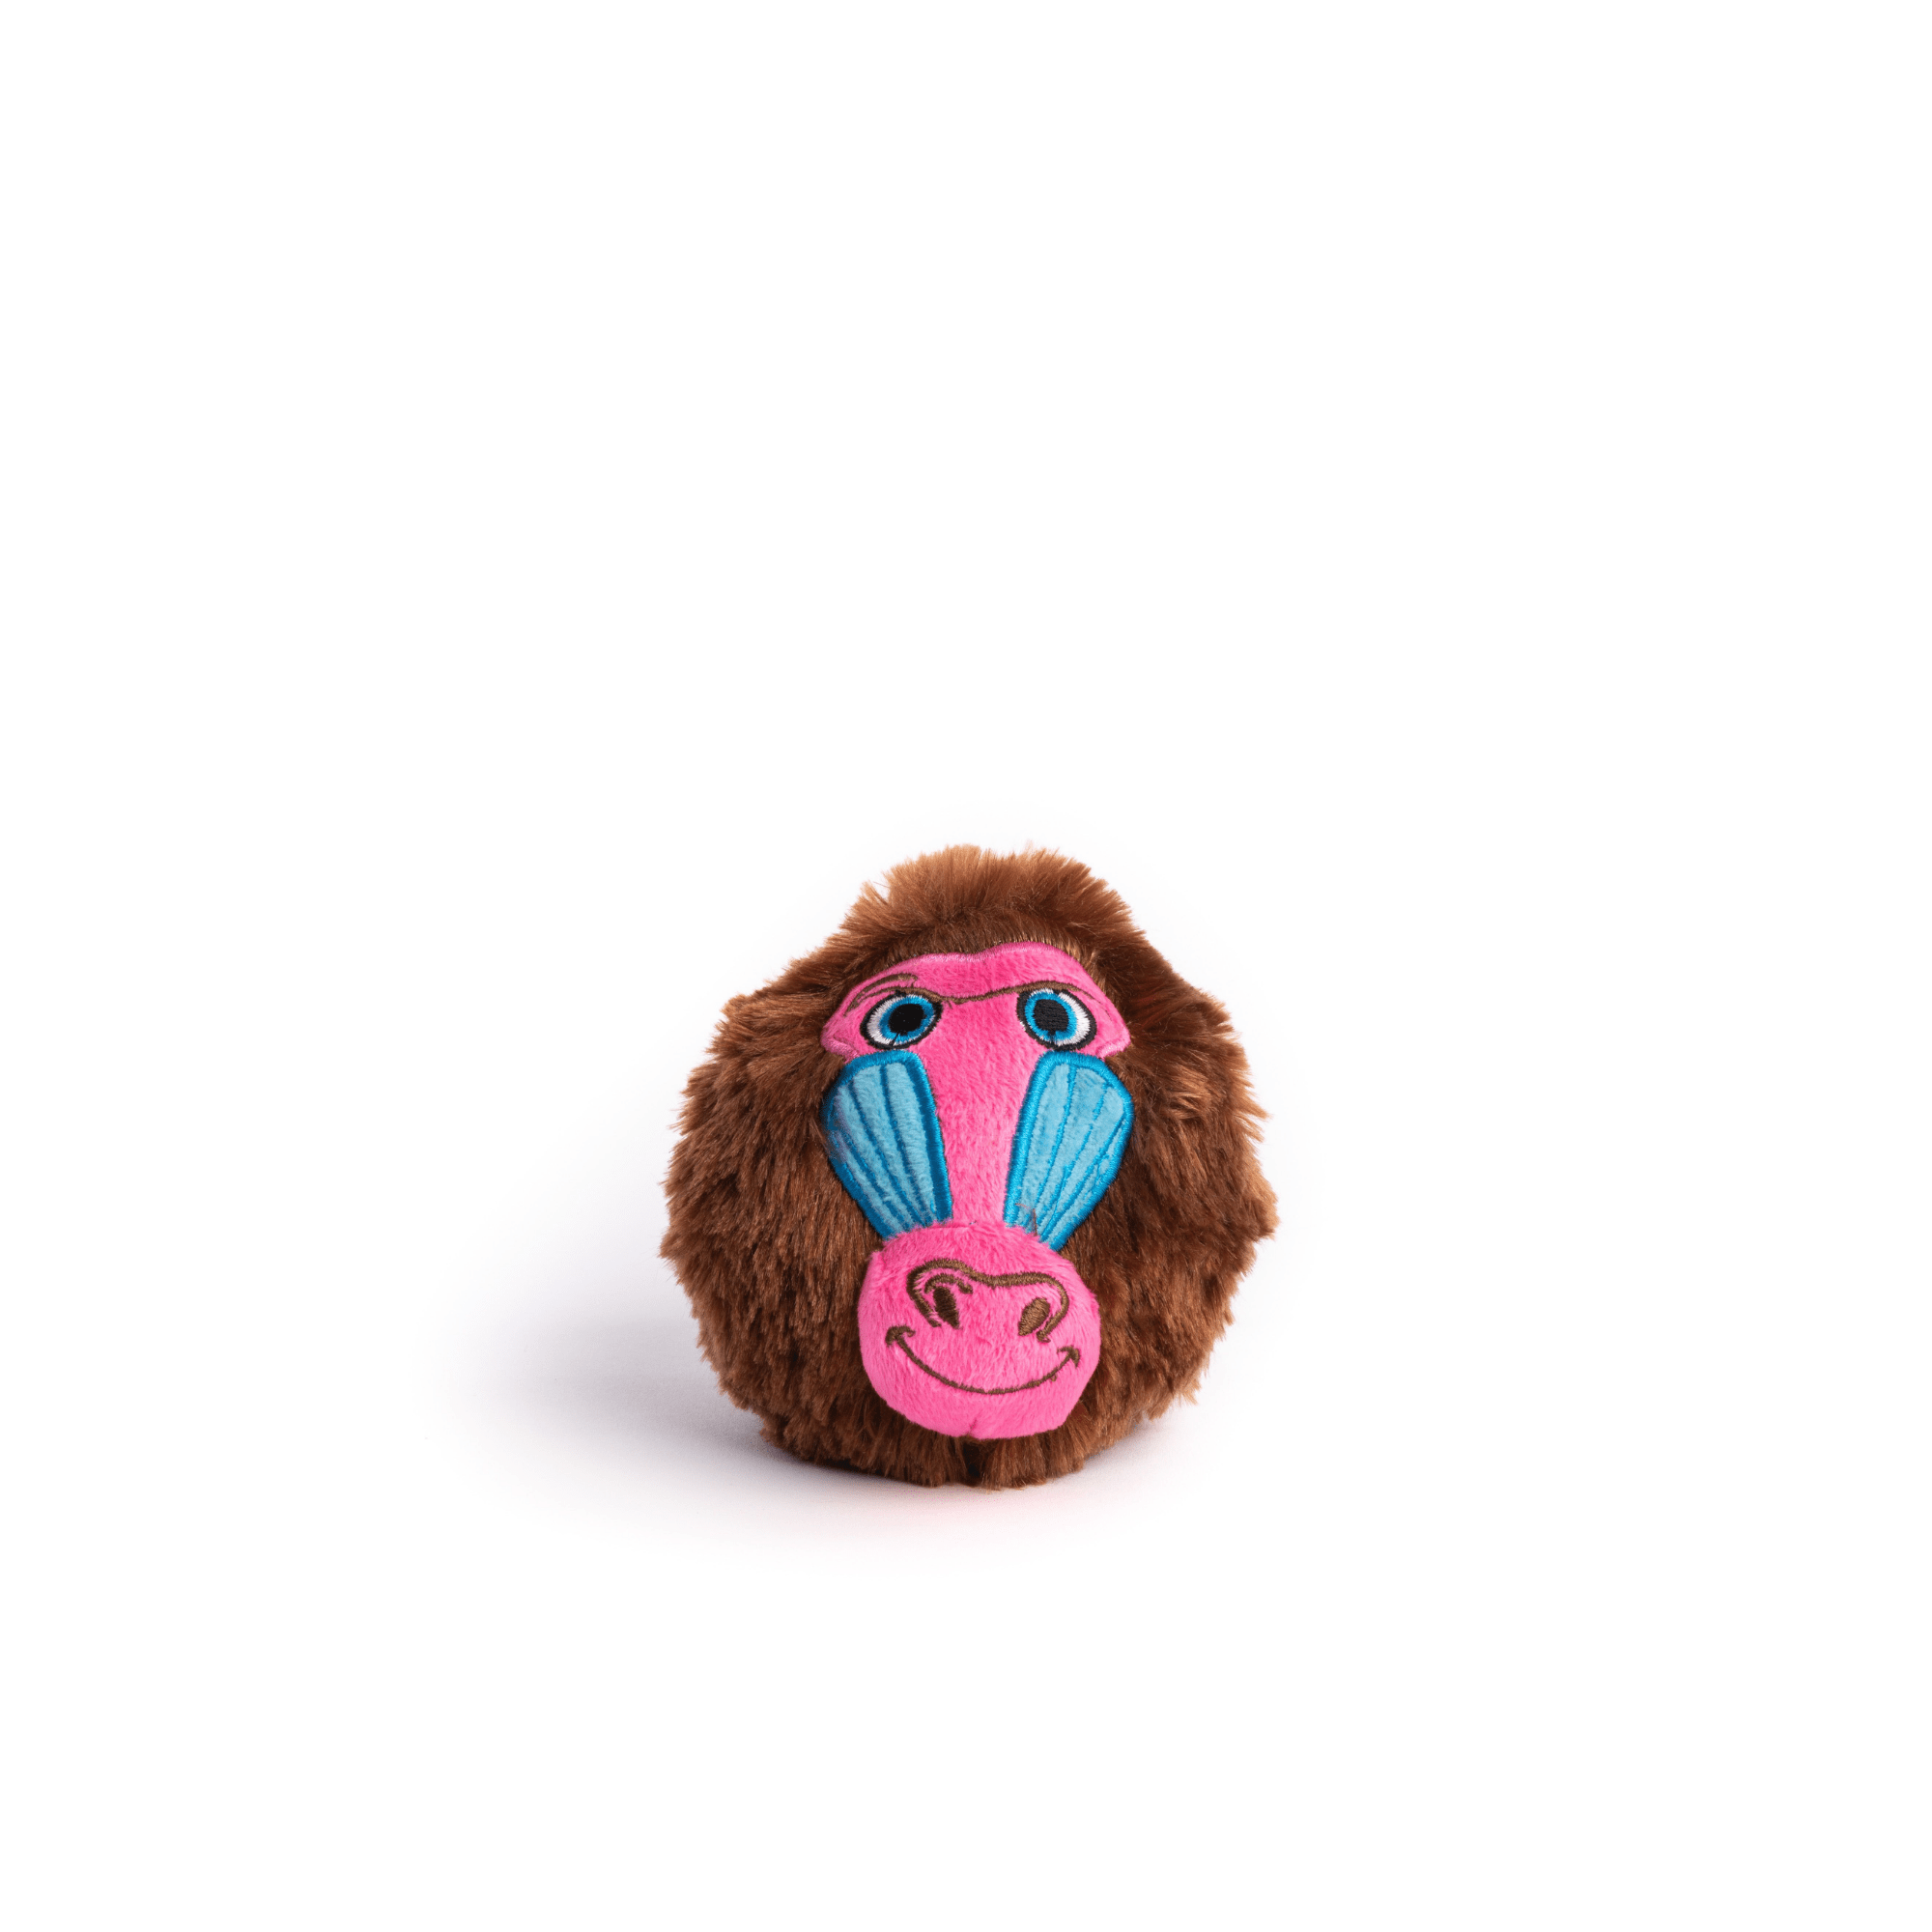 Cute brown fluffy baboon faball® dog toy with pink nose and blue eyes.